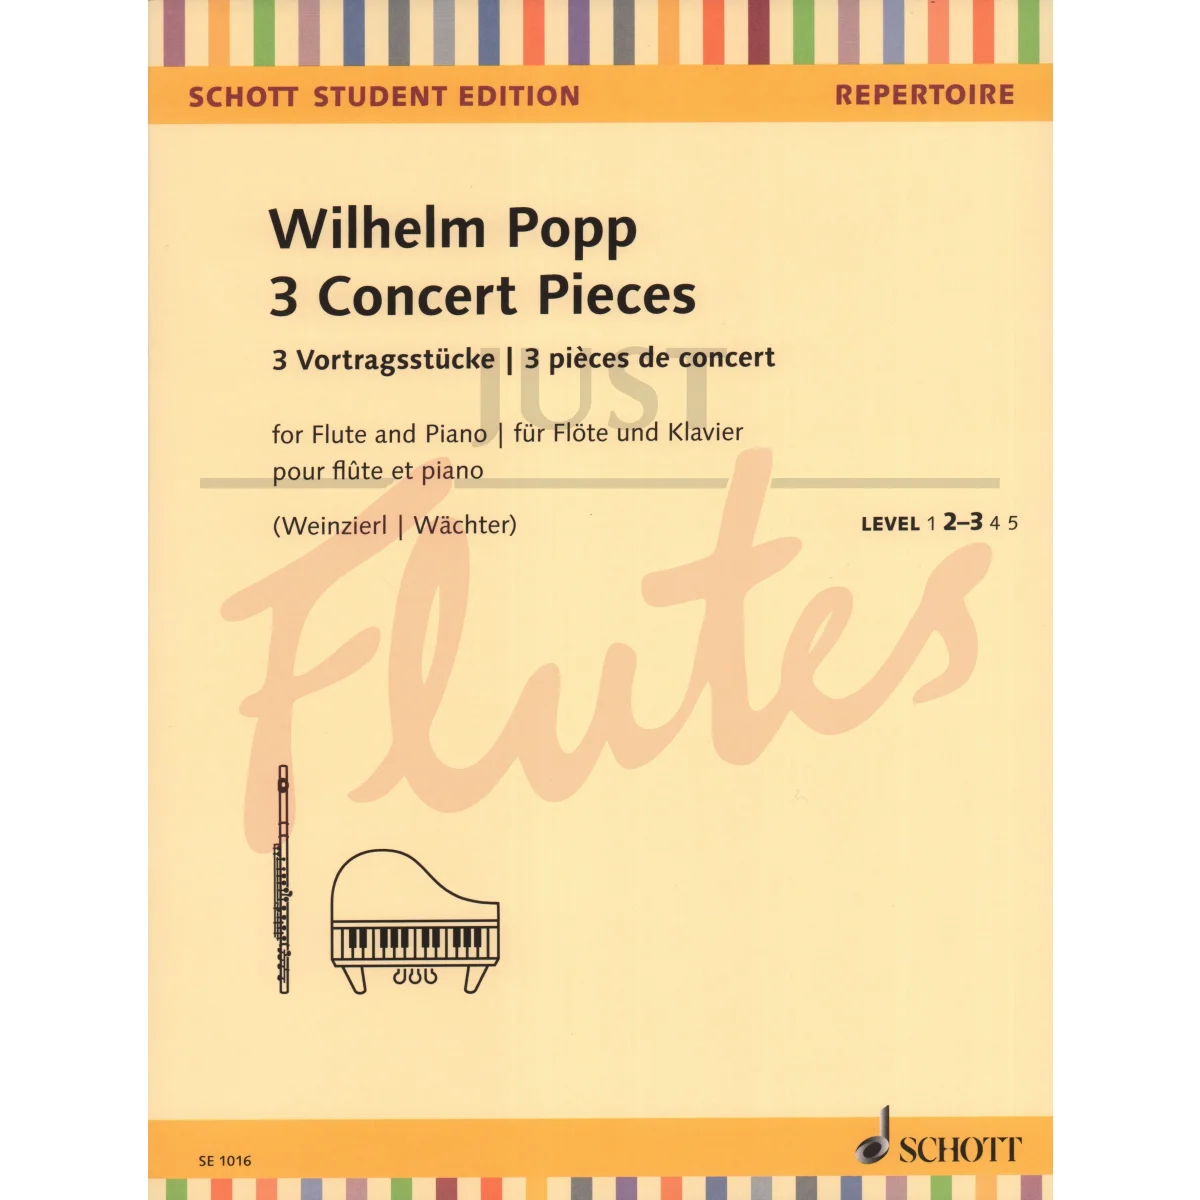 3 Concert Pieces for Flute and Piano